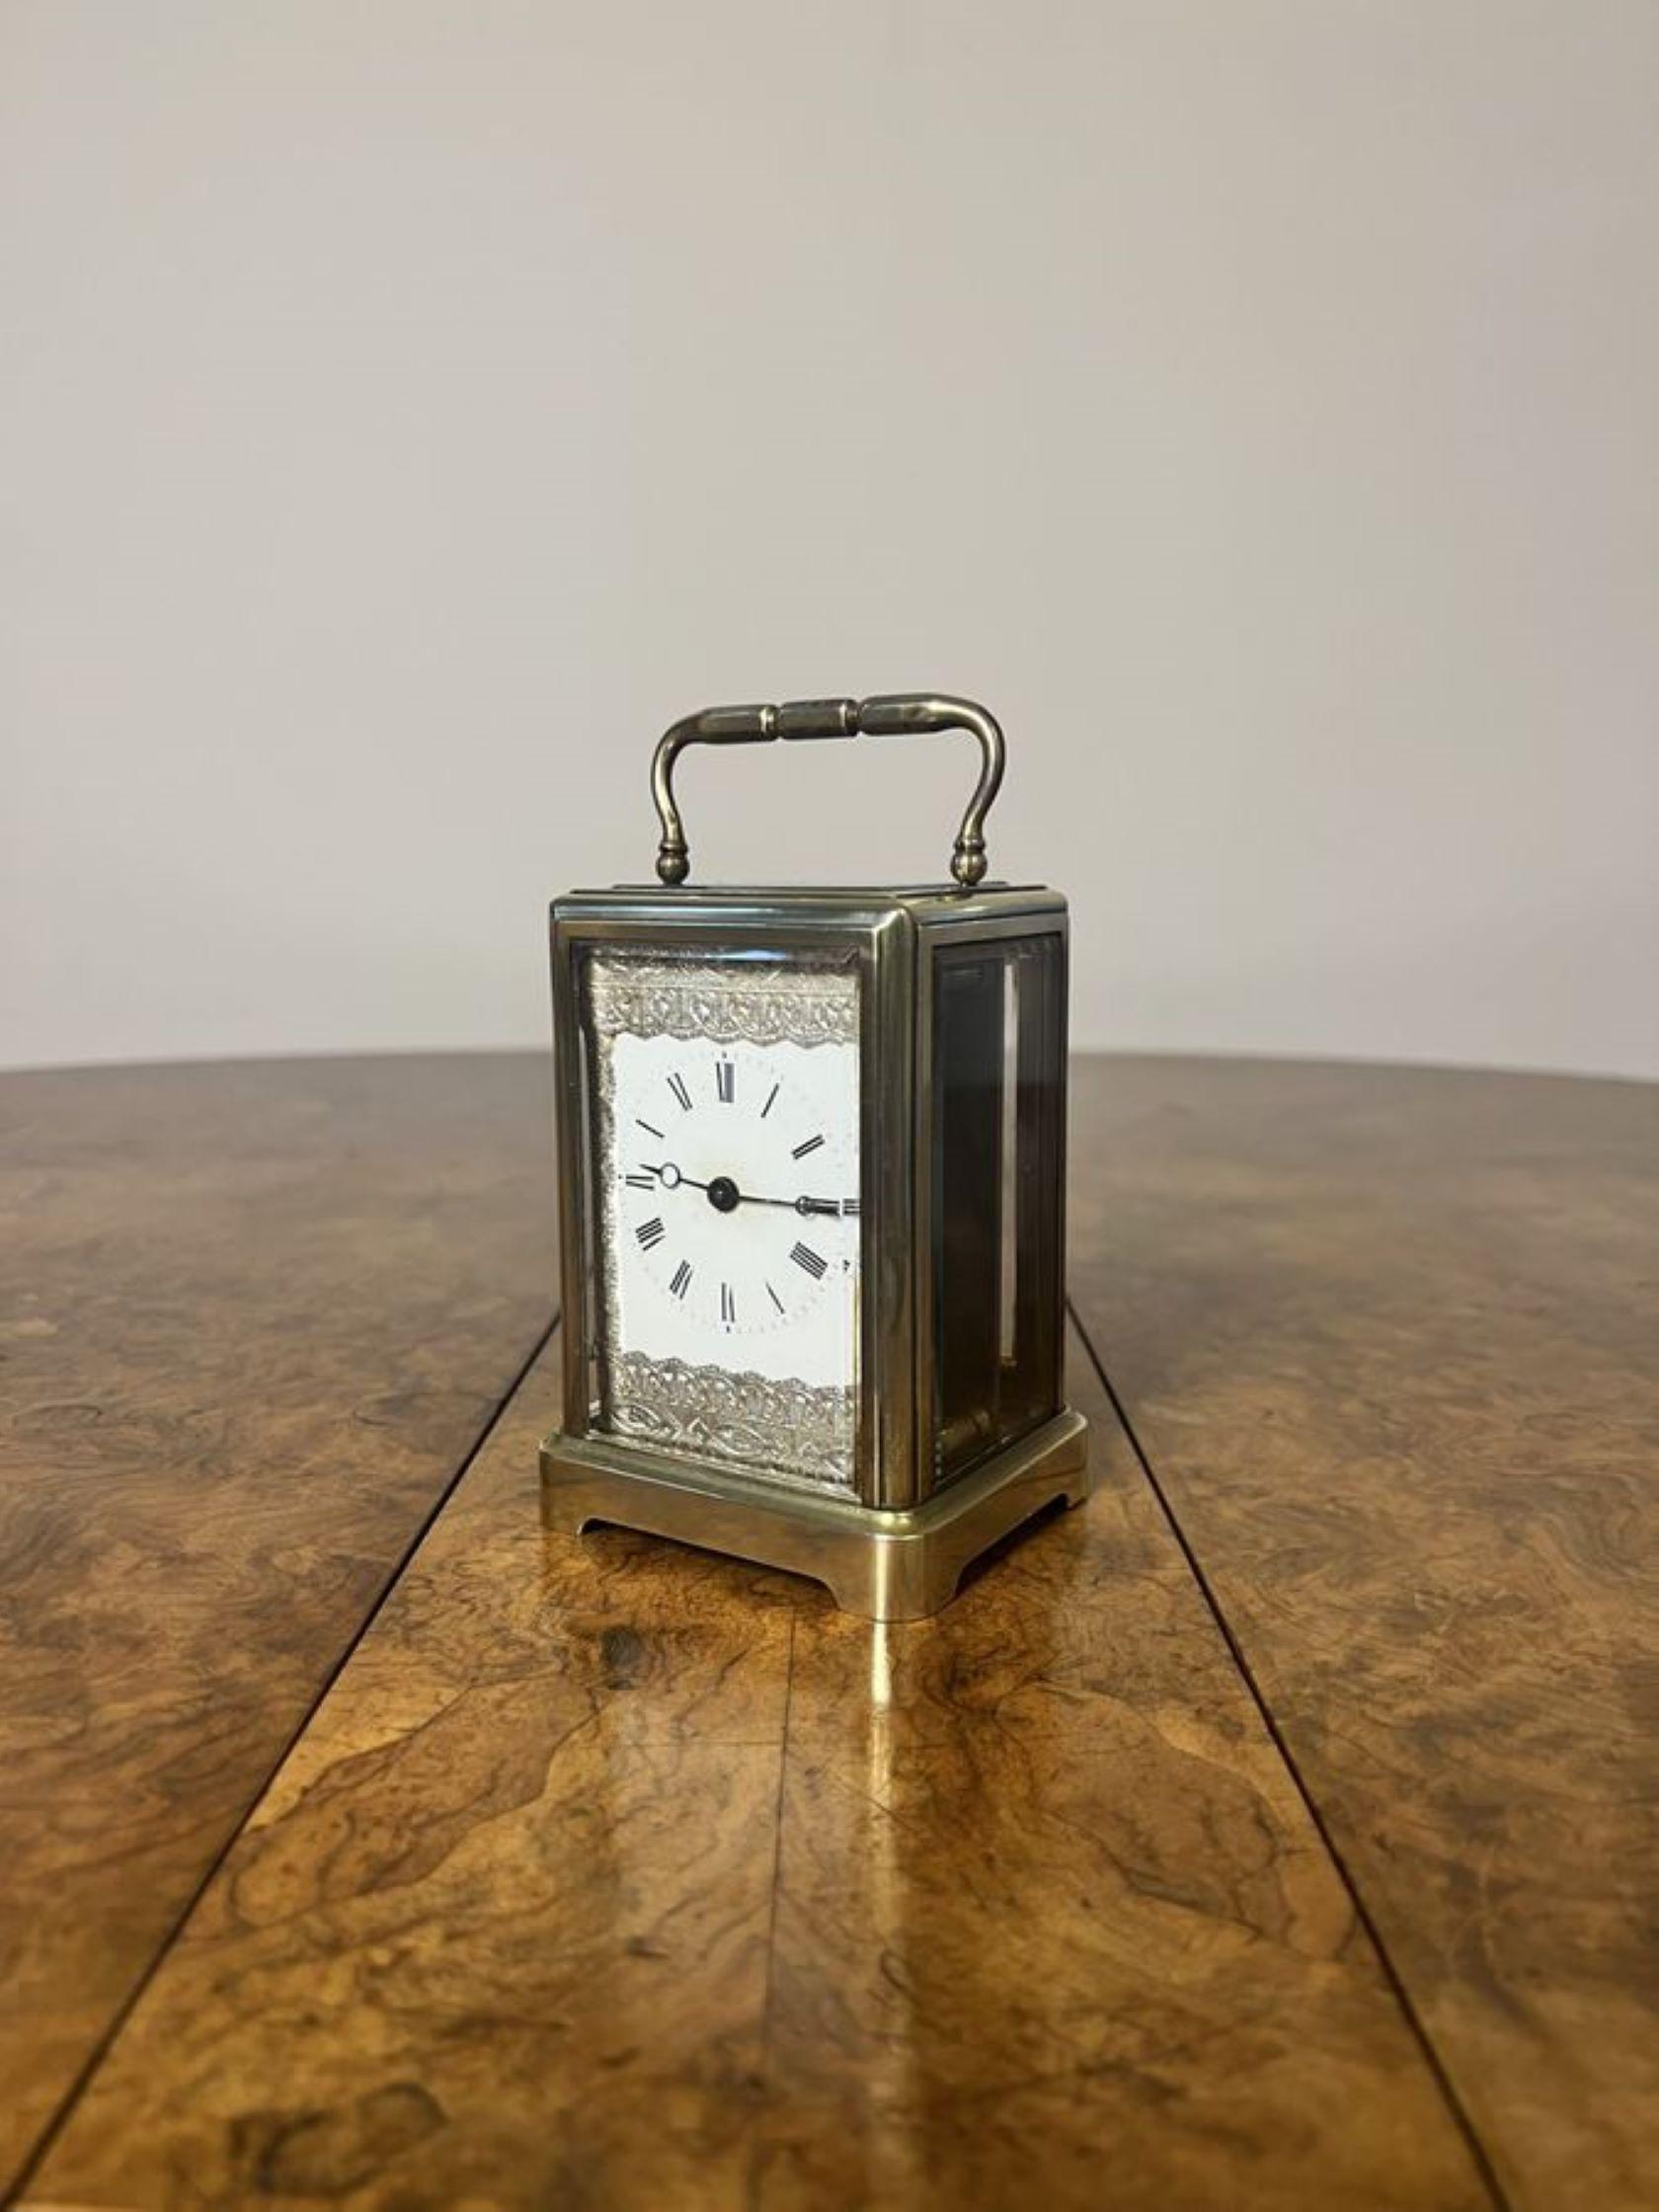 Lovely unusual antique Edwardian brass carriage clock having a unusual antique brass carriage clock with a handle to the top and a visible platform escapement, having a white enamelled dial with Roman numeral and the original hands within a ornate